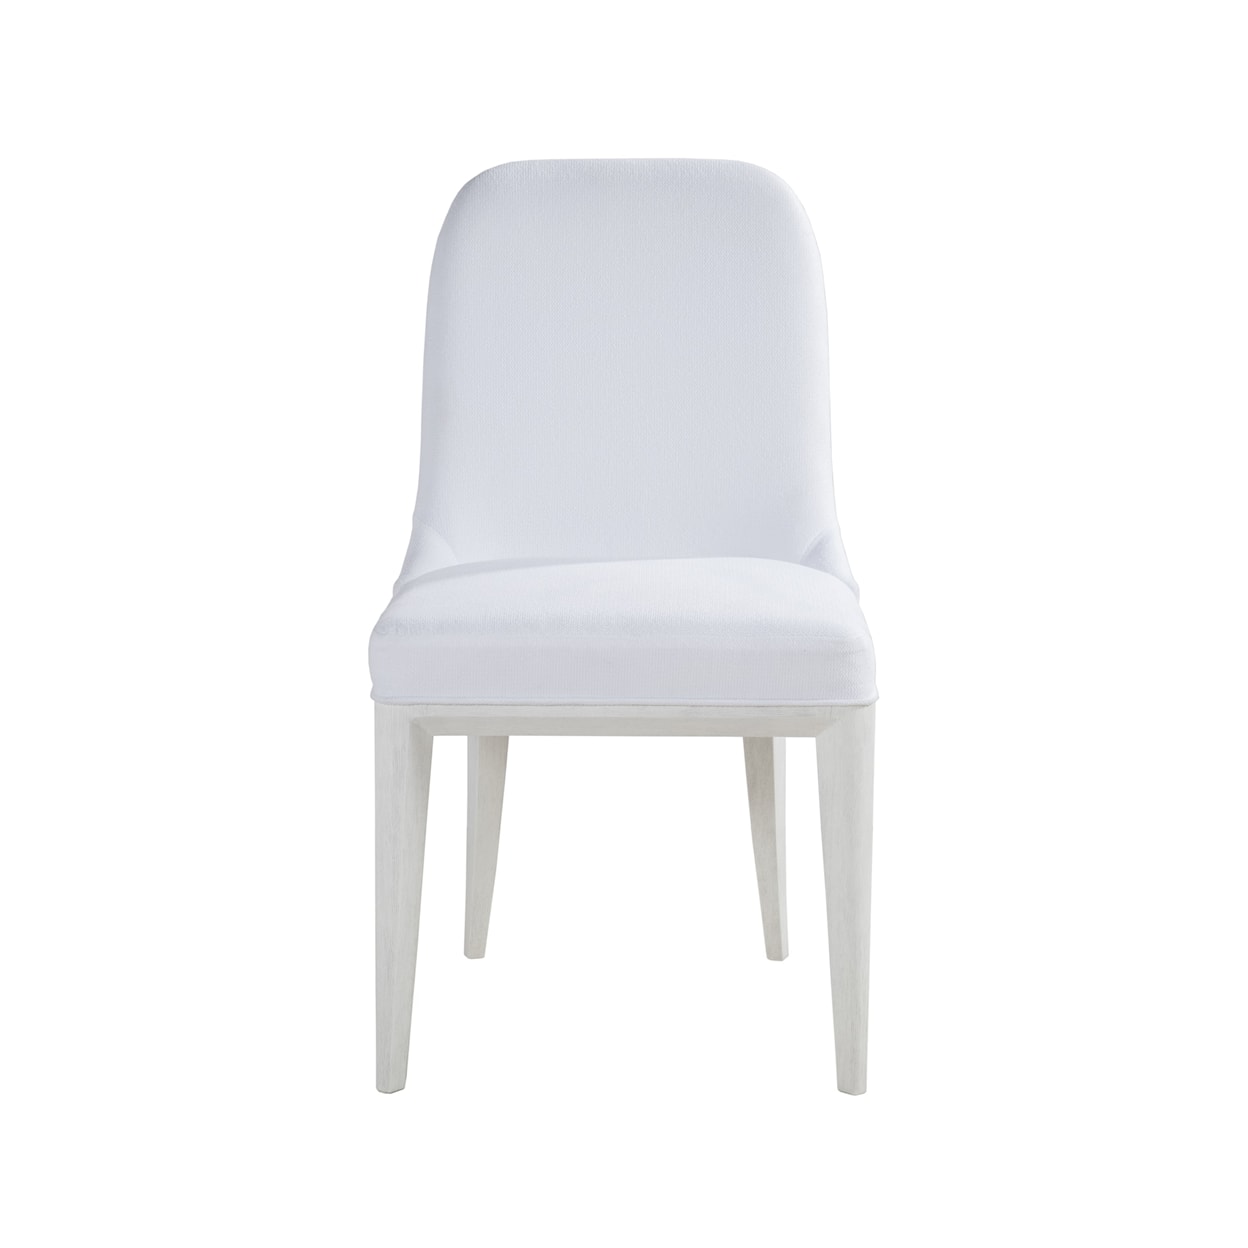 Artistica Marcel Upholstered Dining Side Chair